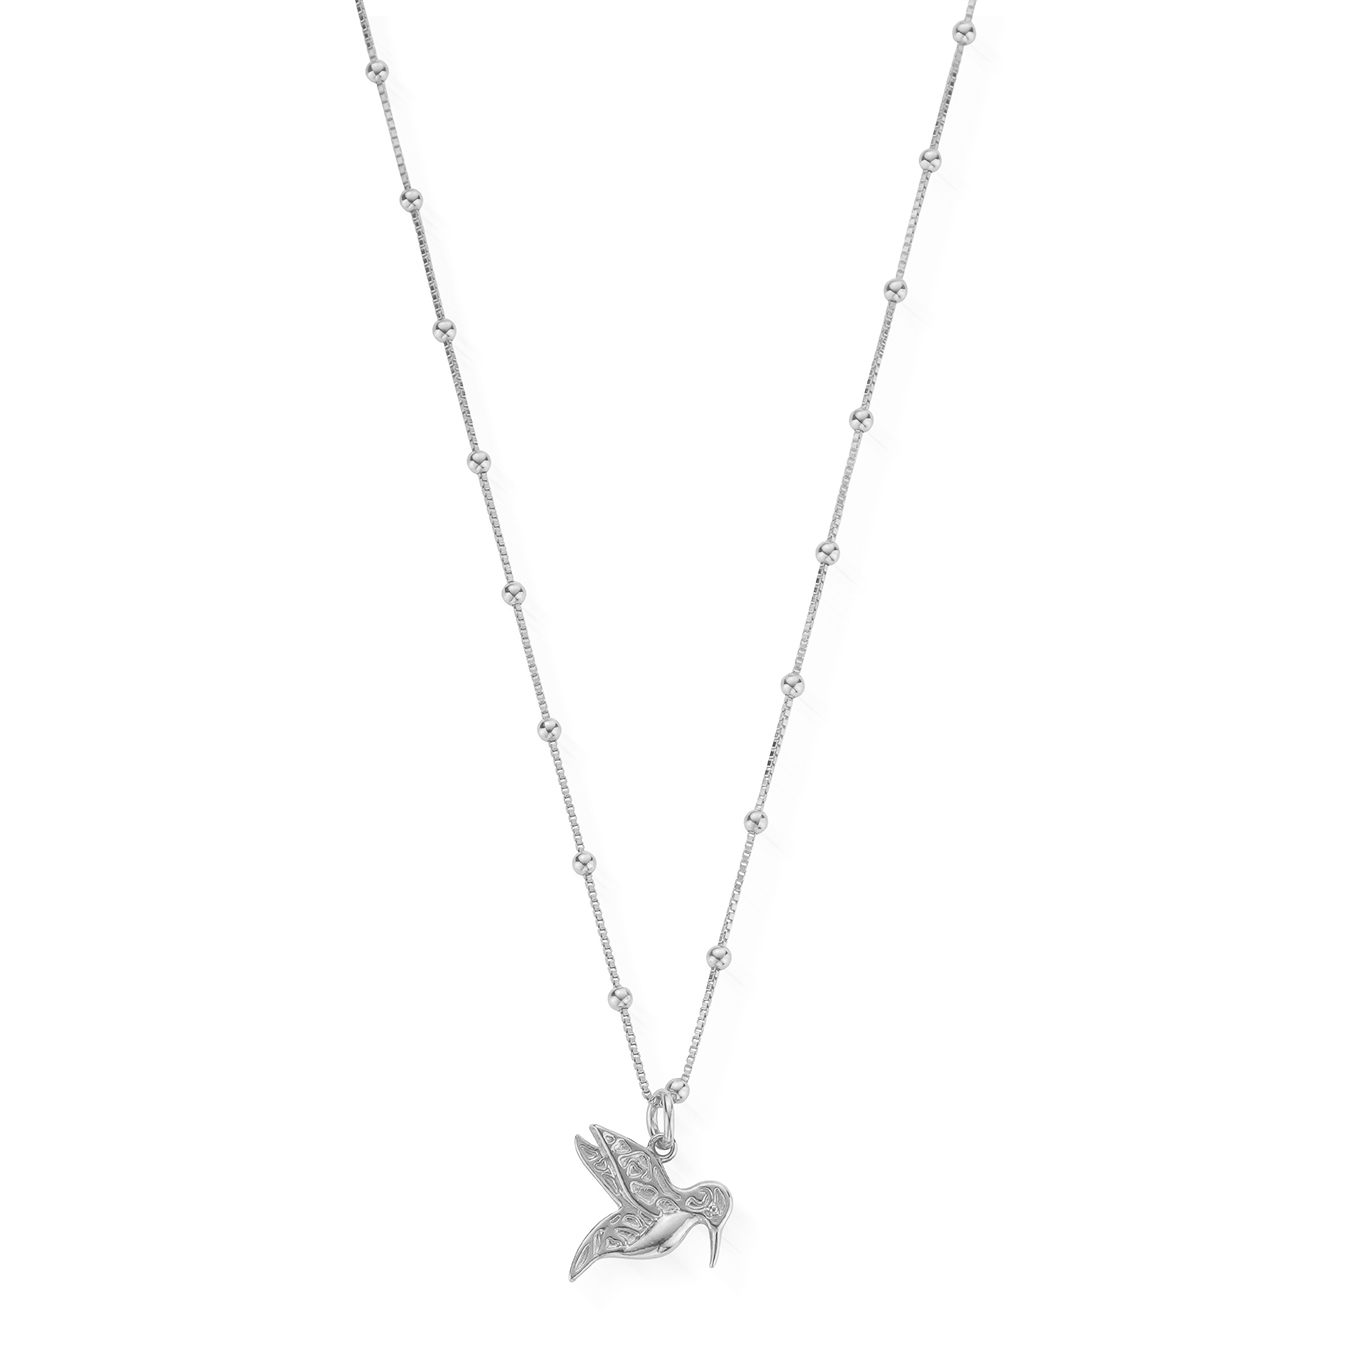 STERLING SILVER BOBBLE CHAIN HUMMING BIRD NECKLACE SNBB670